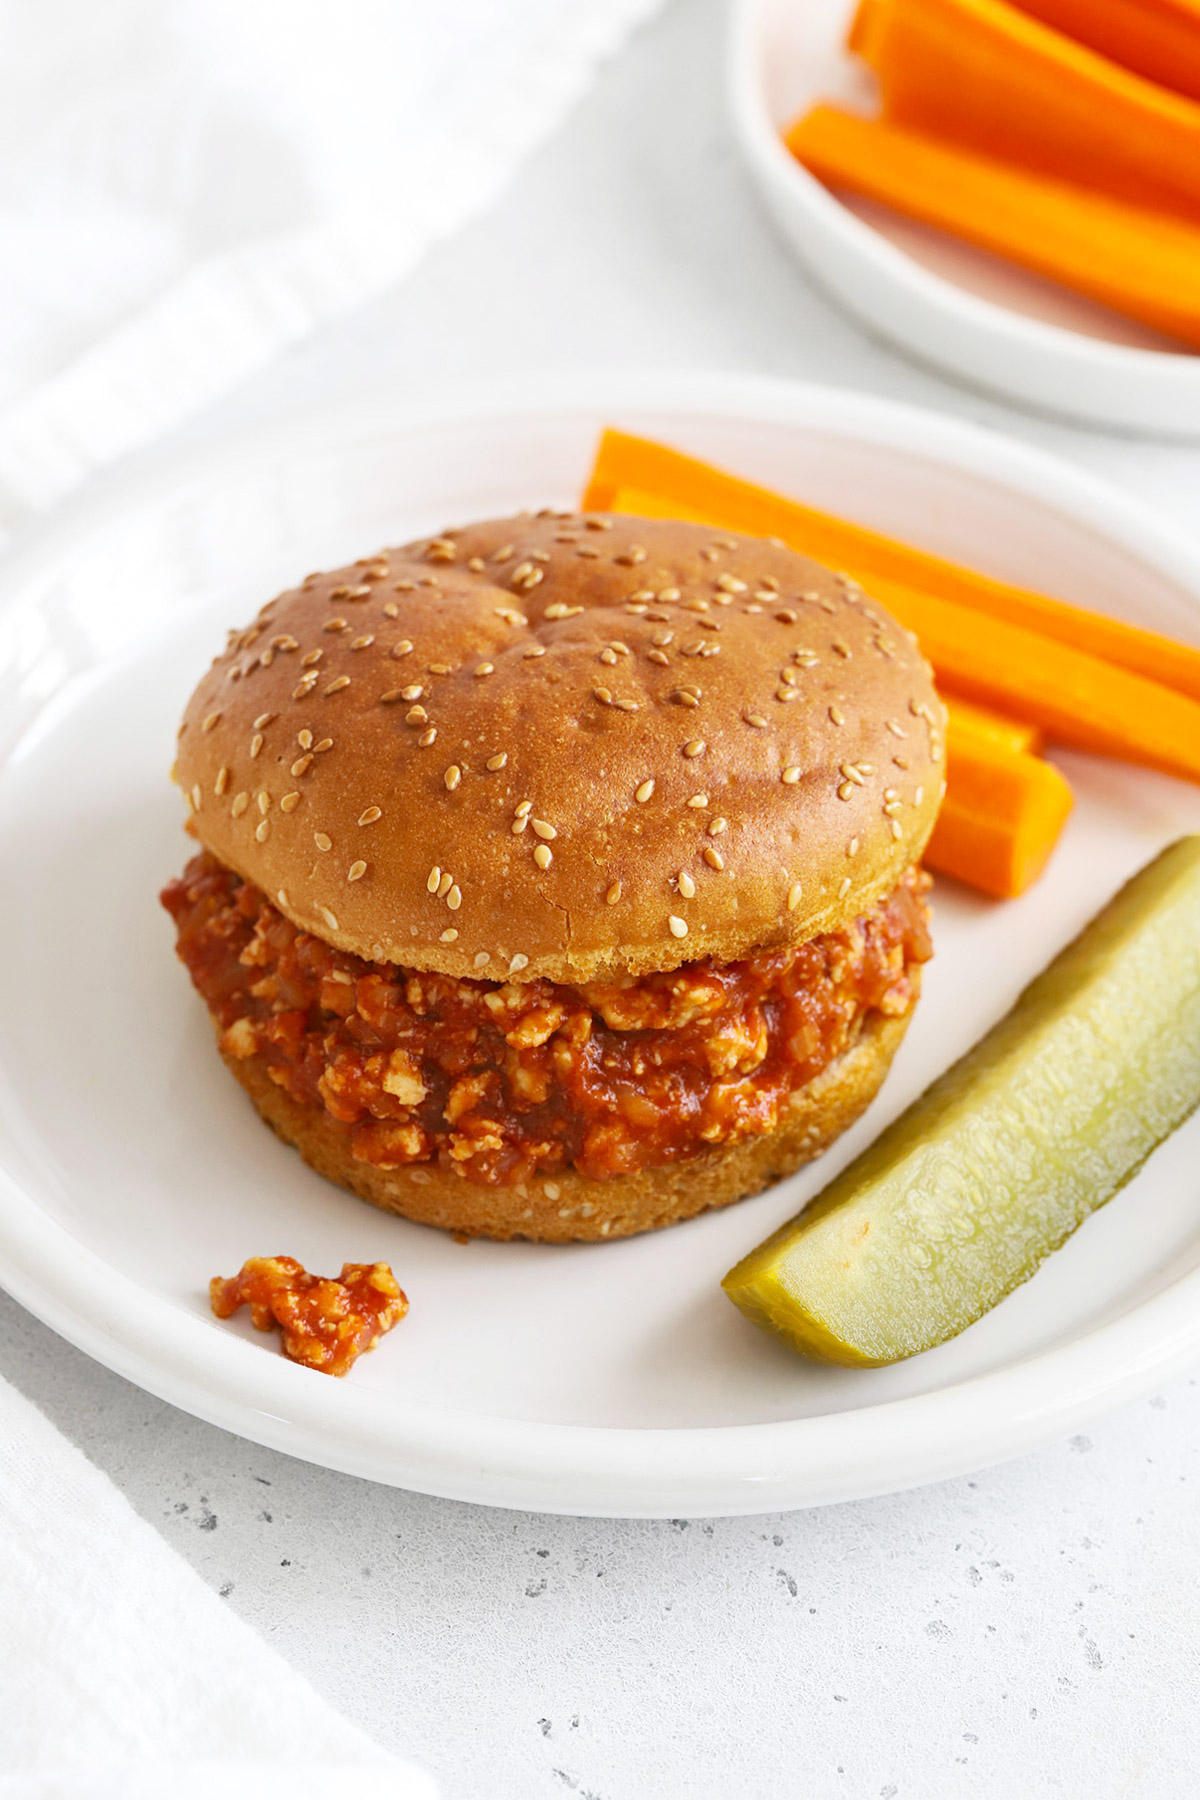 Front view of healthy chicken sloppy joes on gluten-free buns with a pickle wedge and carrot sticks